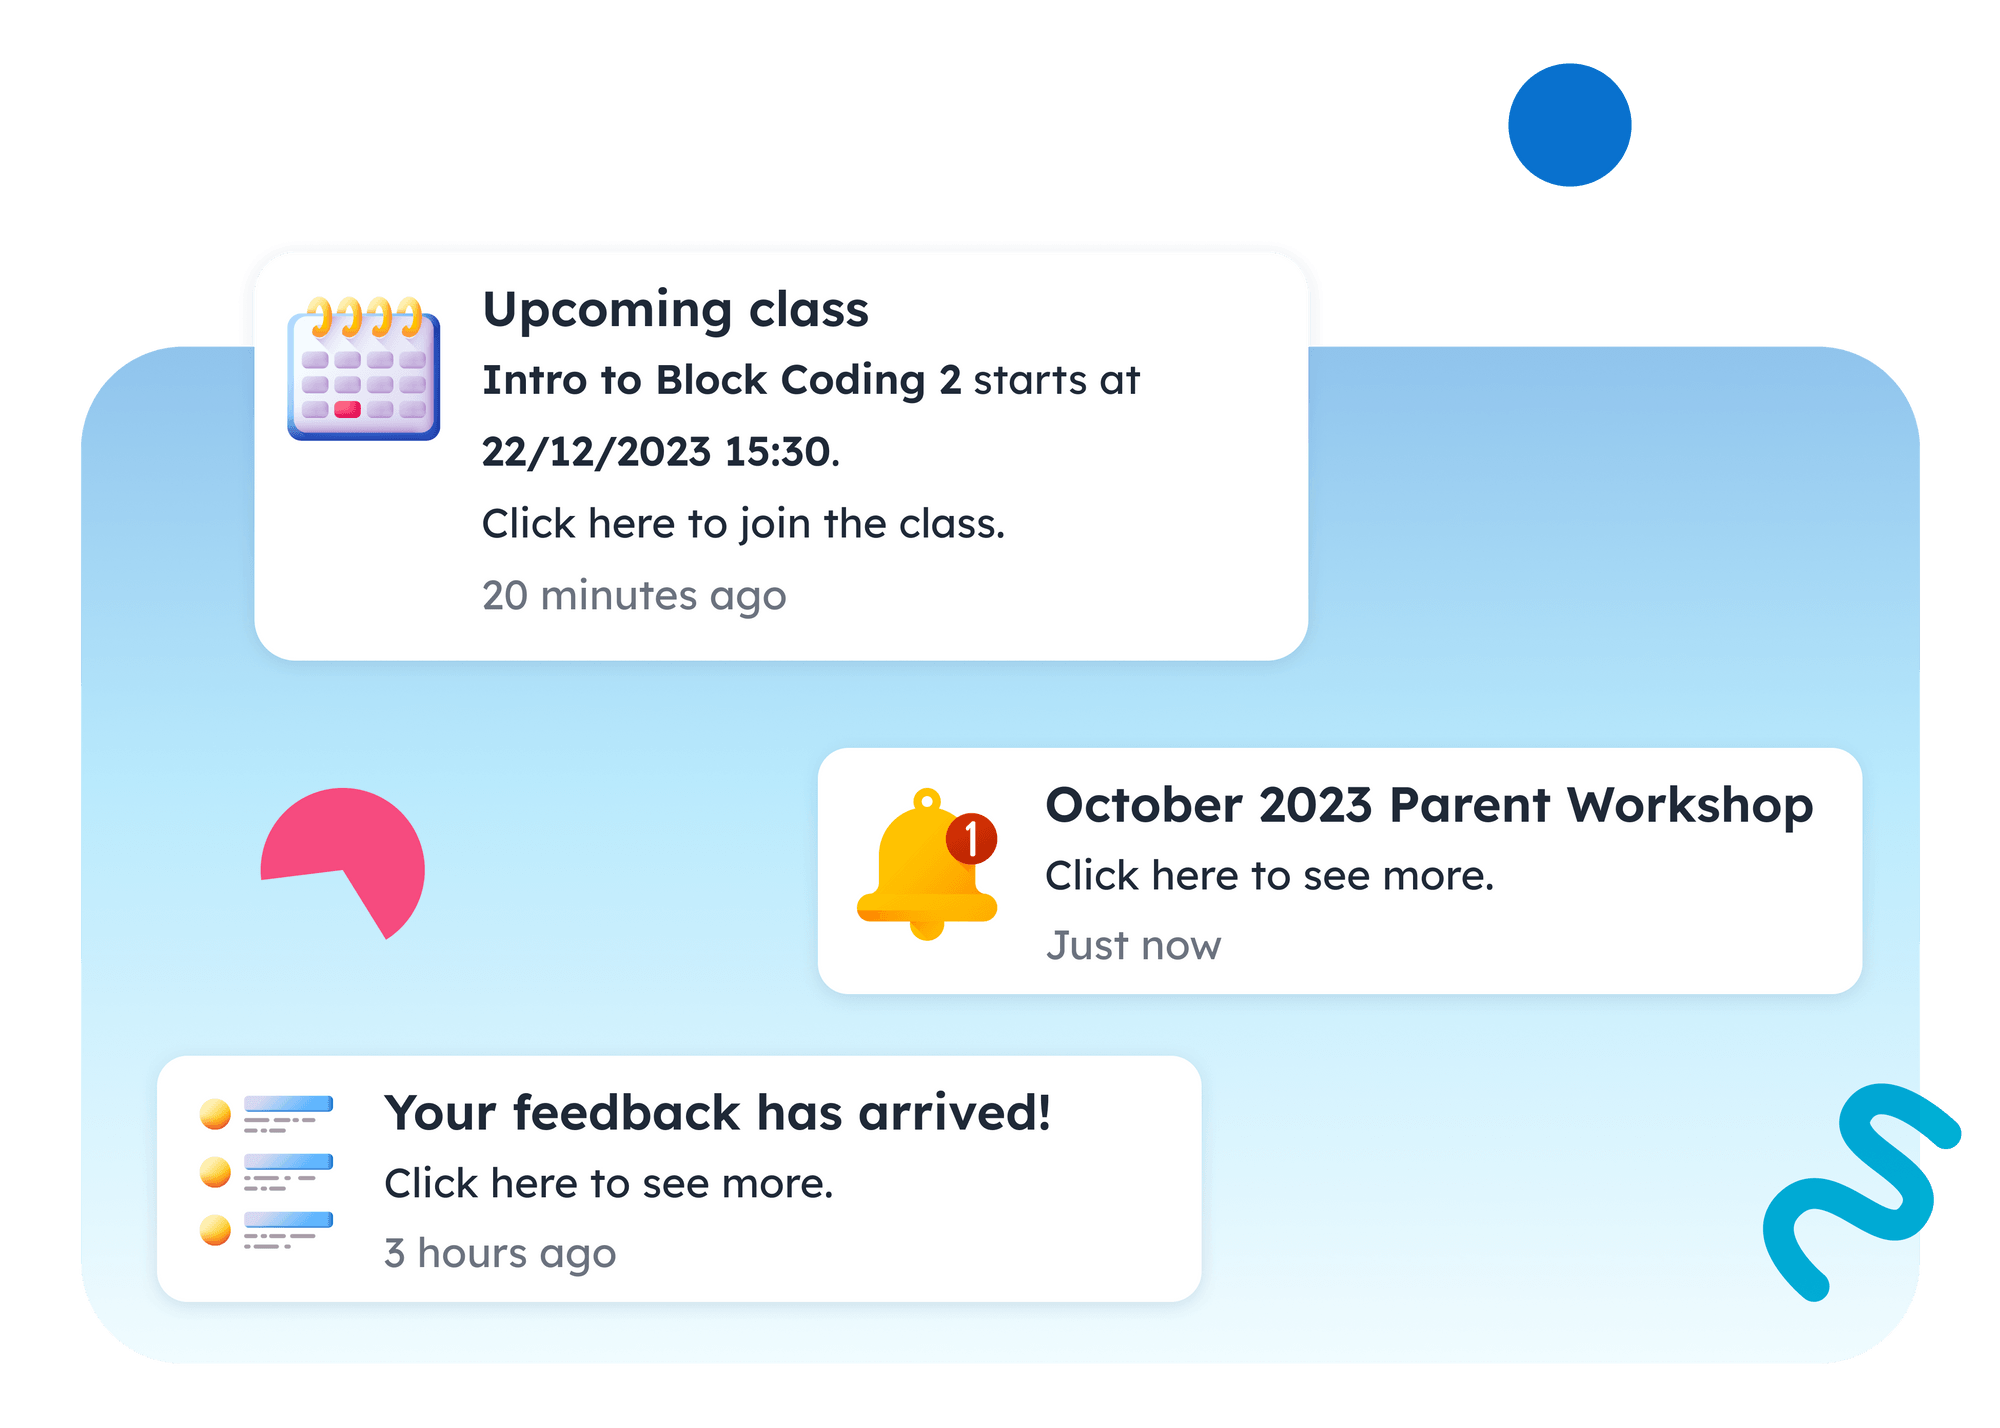 Examples of notifications pushed to learners including class reminders, class feedback, and important events.